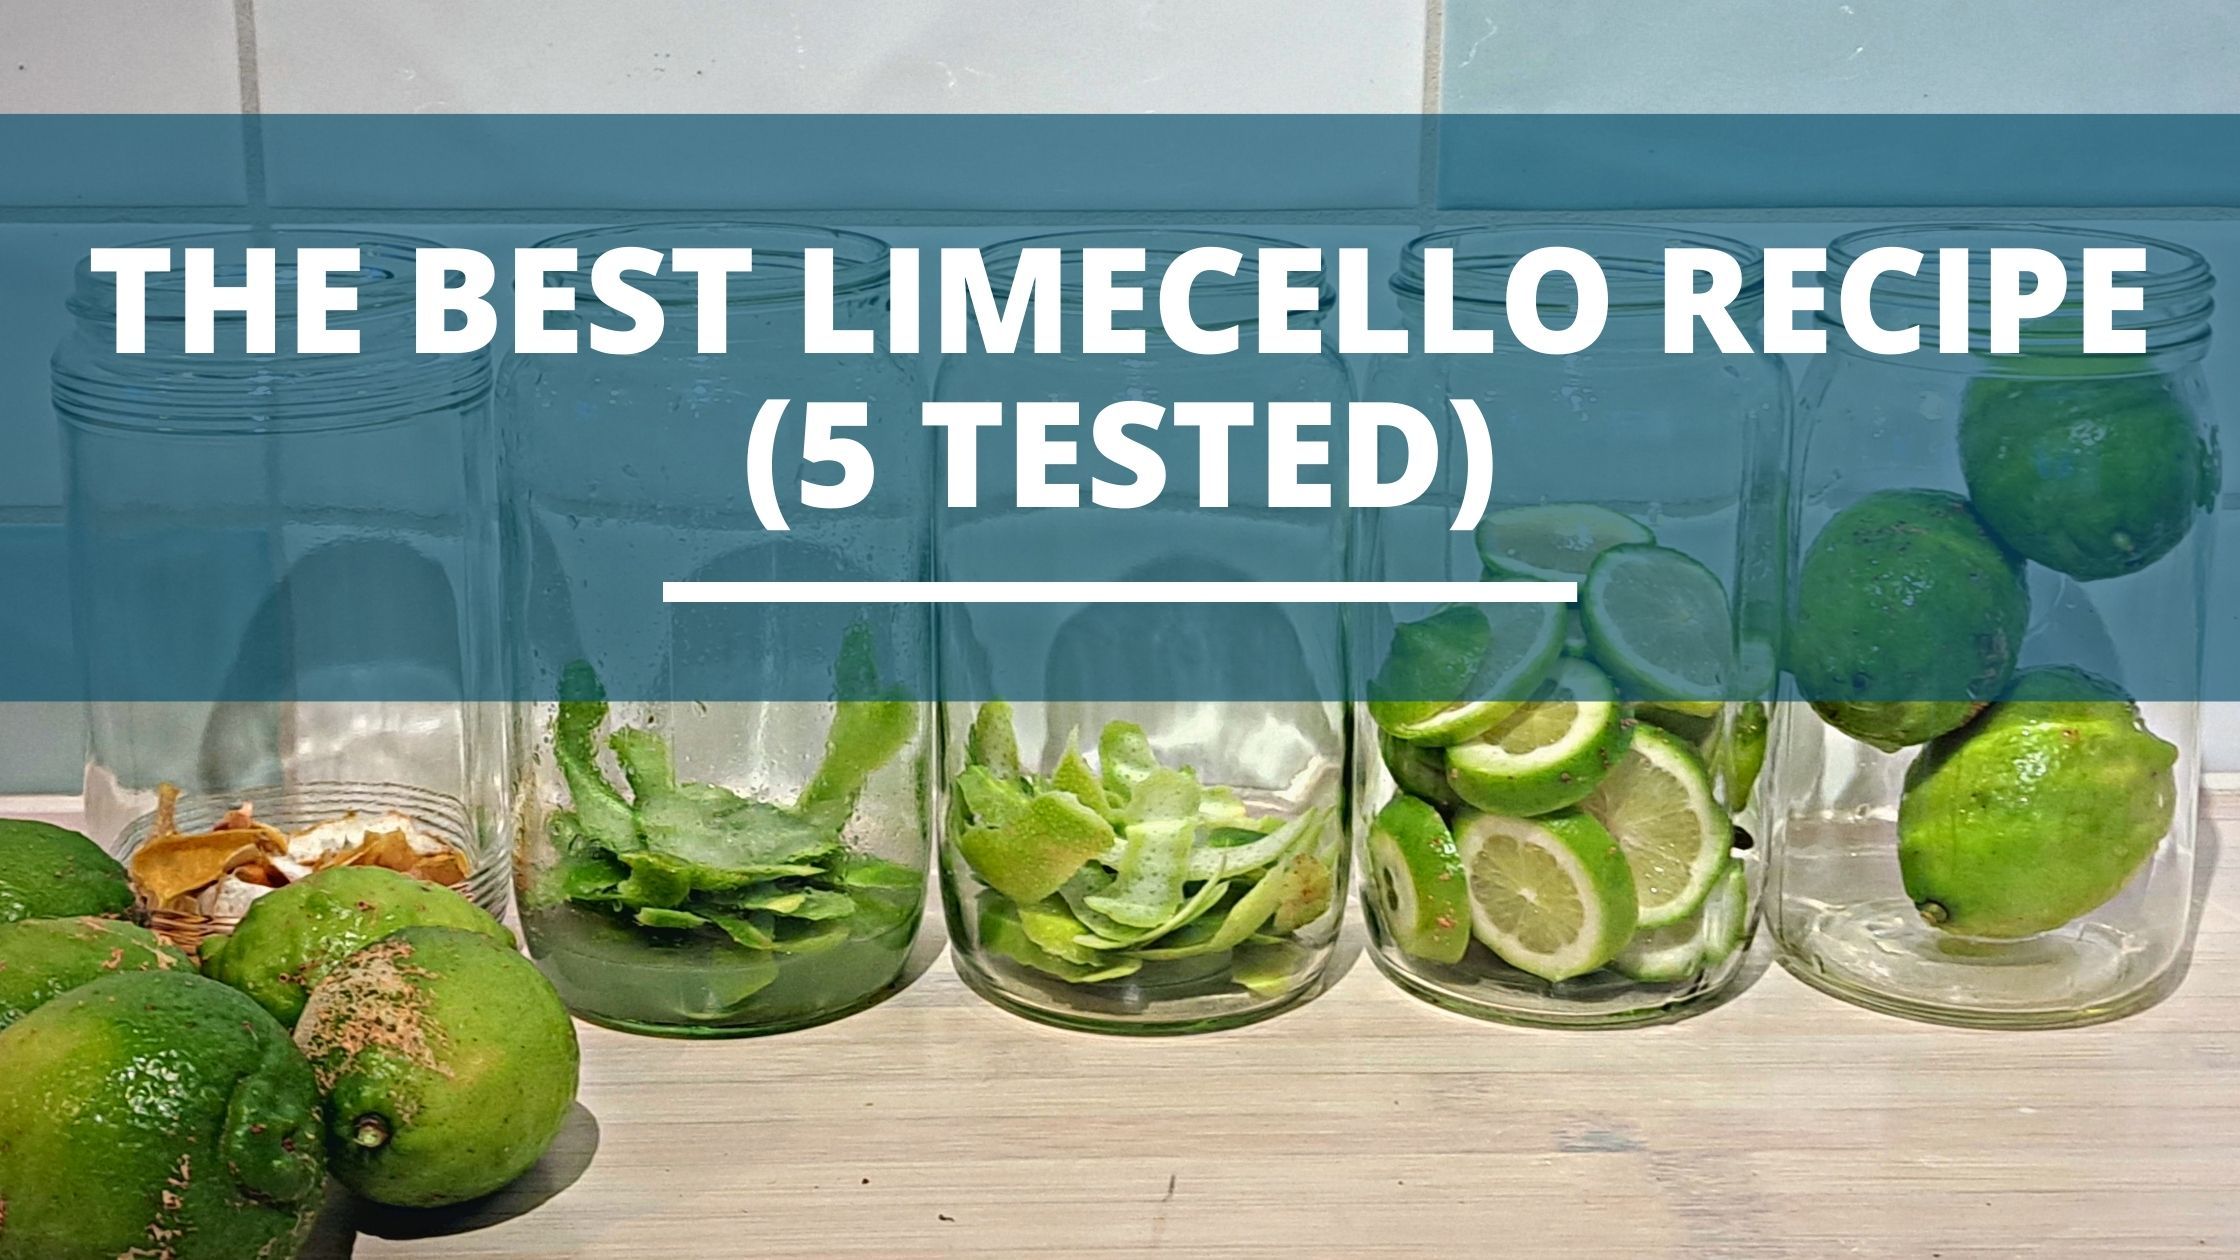 Image of diy distilling the best limecello recipe we tested 5 variations